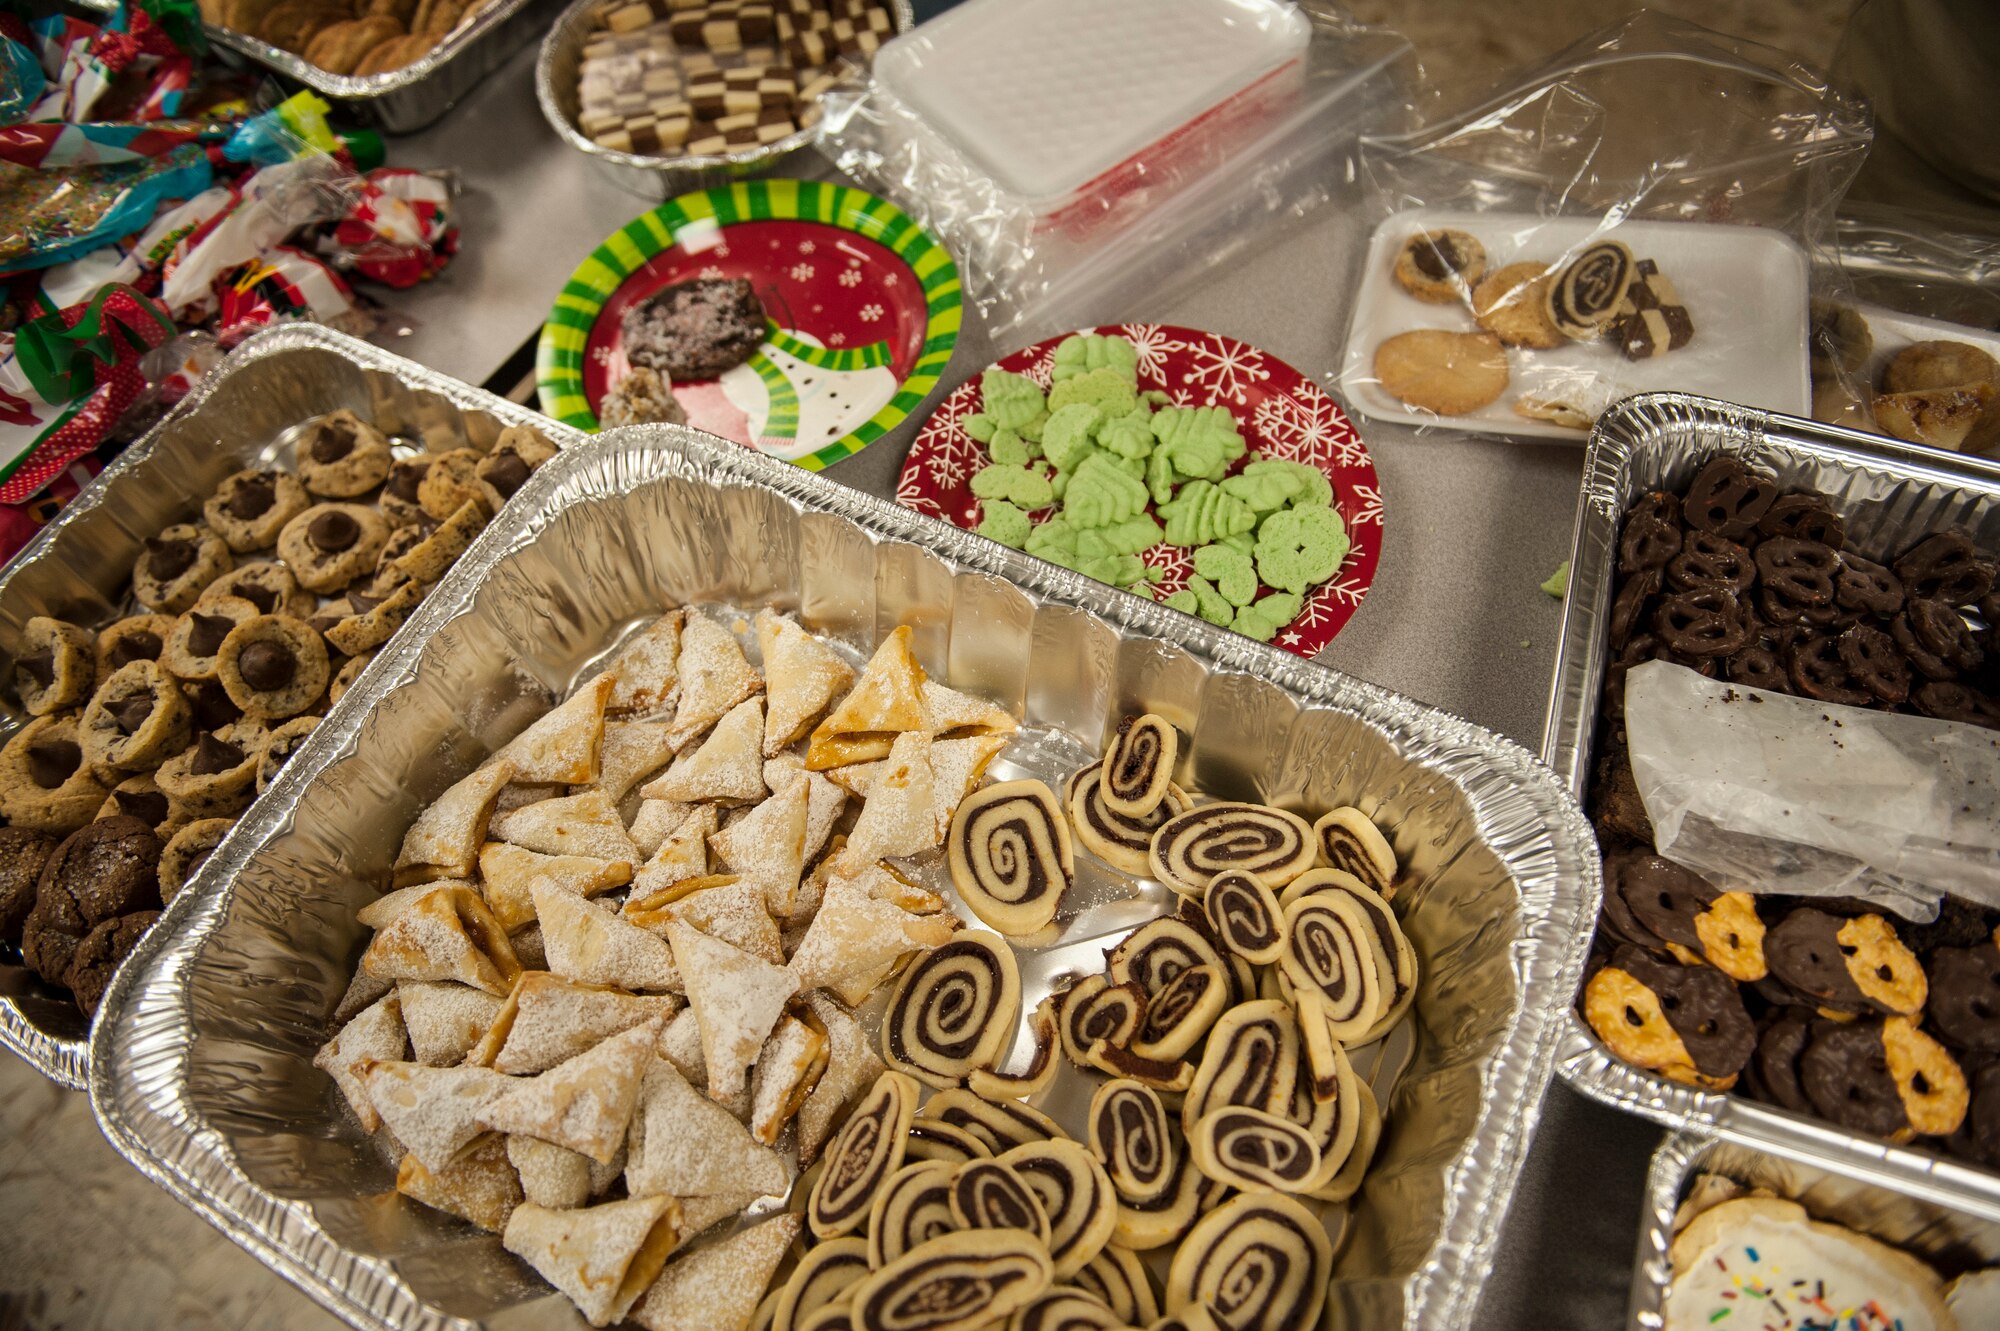 Cookies and other treats await packaging during the Airman Cookie Drive at Nellis Air Force Base, Nev., Dec. 14, 2015. More than 12,000 cookies were collected and distributed to Airmen living in the Nellis AFB dormitories. (U.S. Air Force photo by Staff Sgt. Siuta B. Ika)